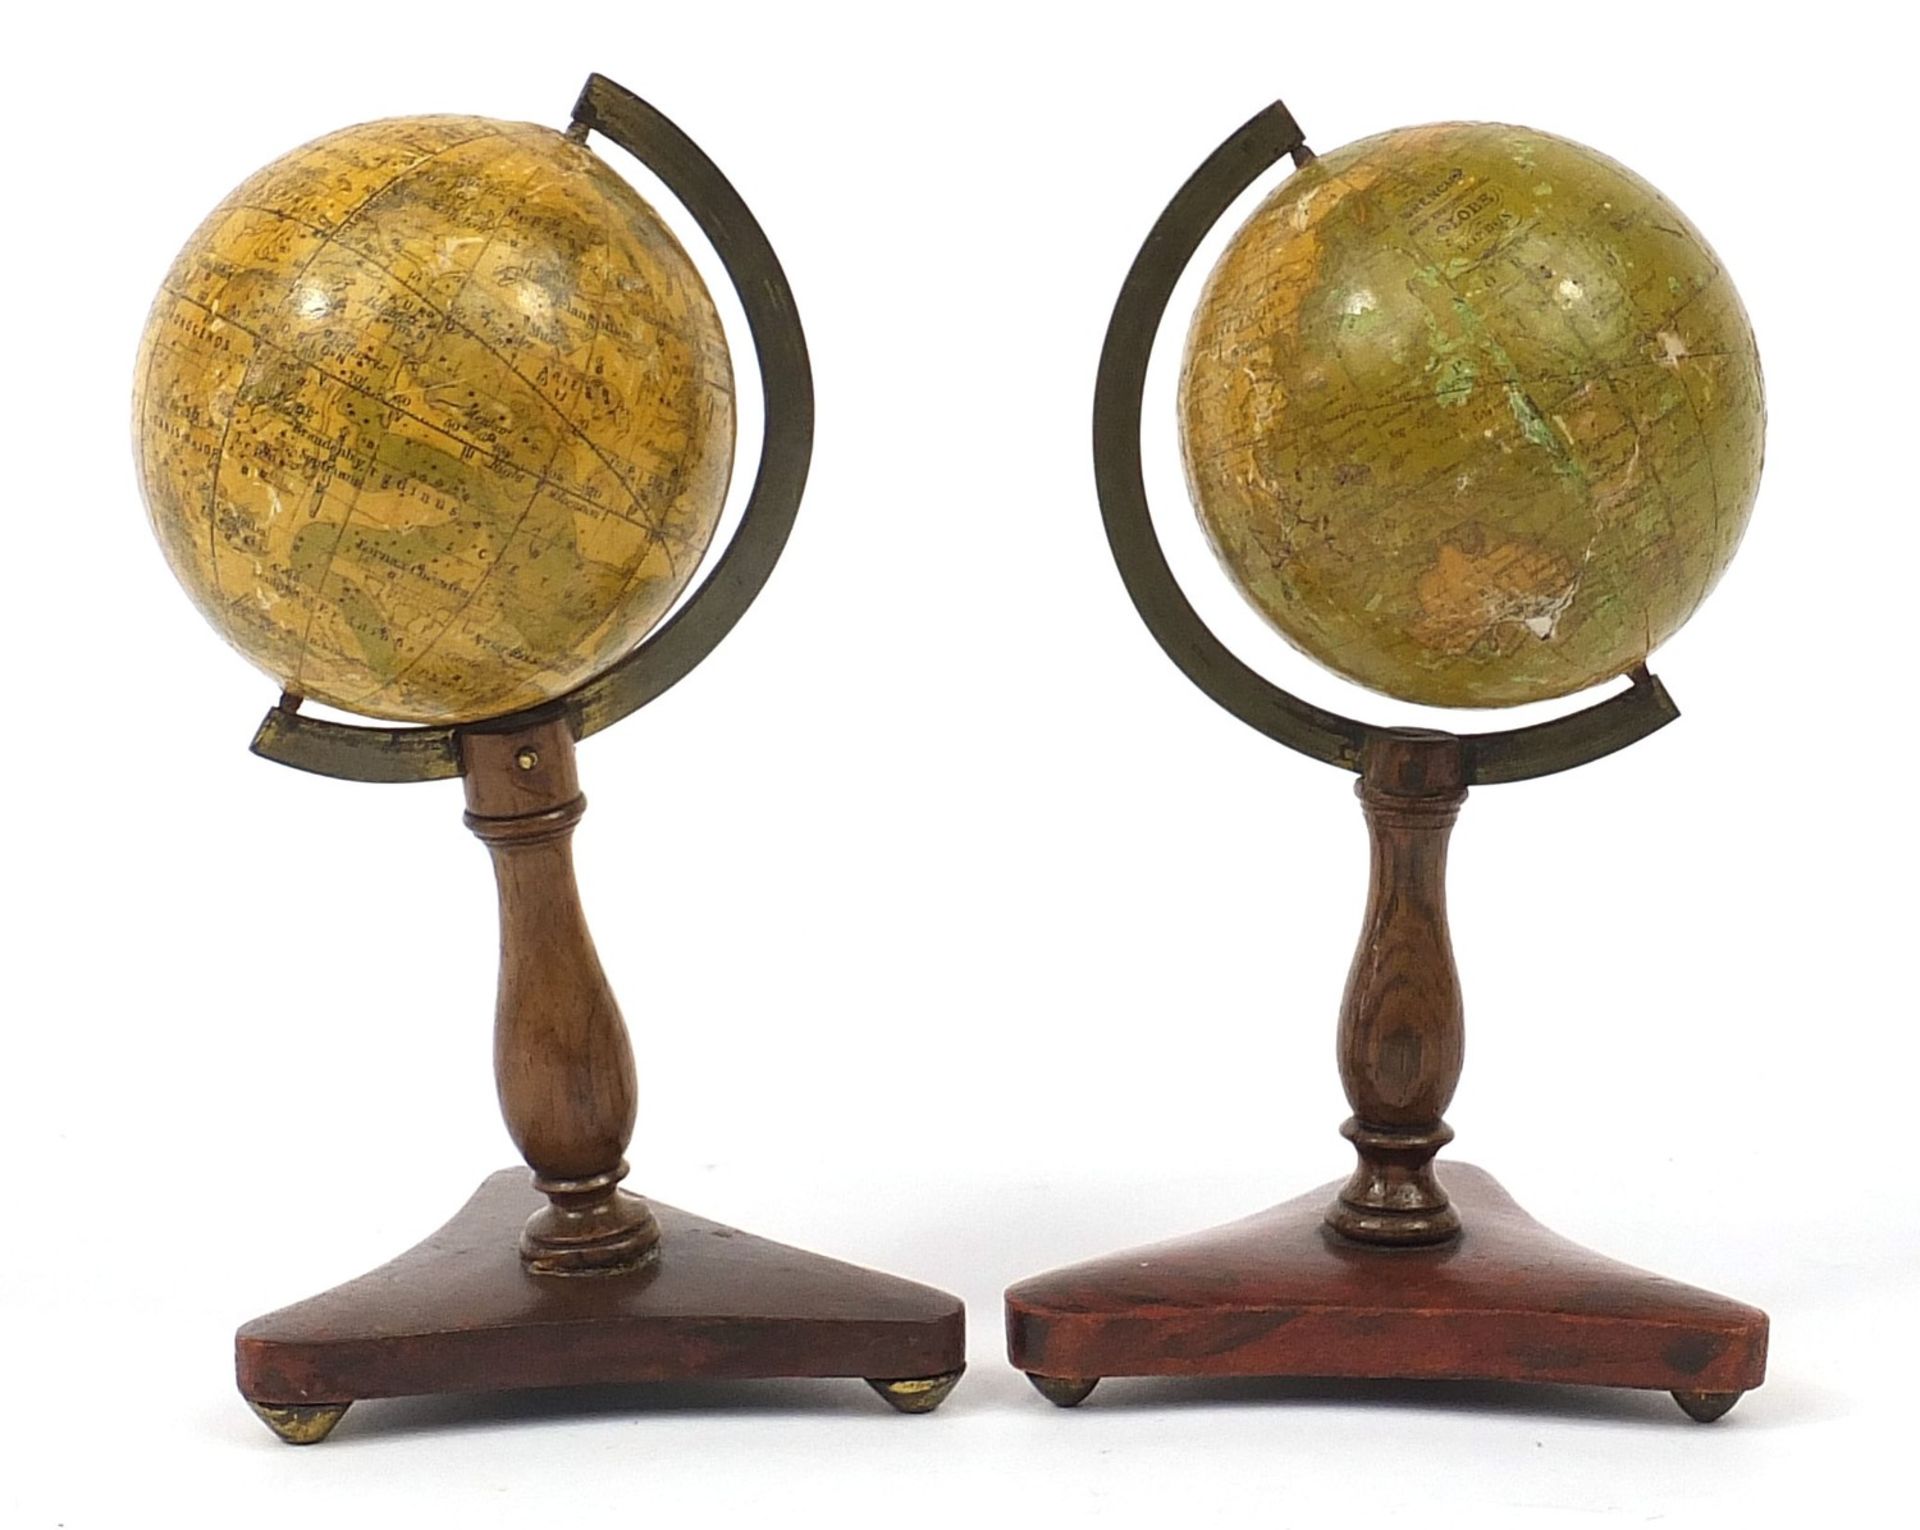 Wrench's of London, matched pair of 19th century celestial and terrestrial desk globes, each with b - Image 13 of 14